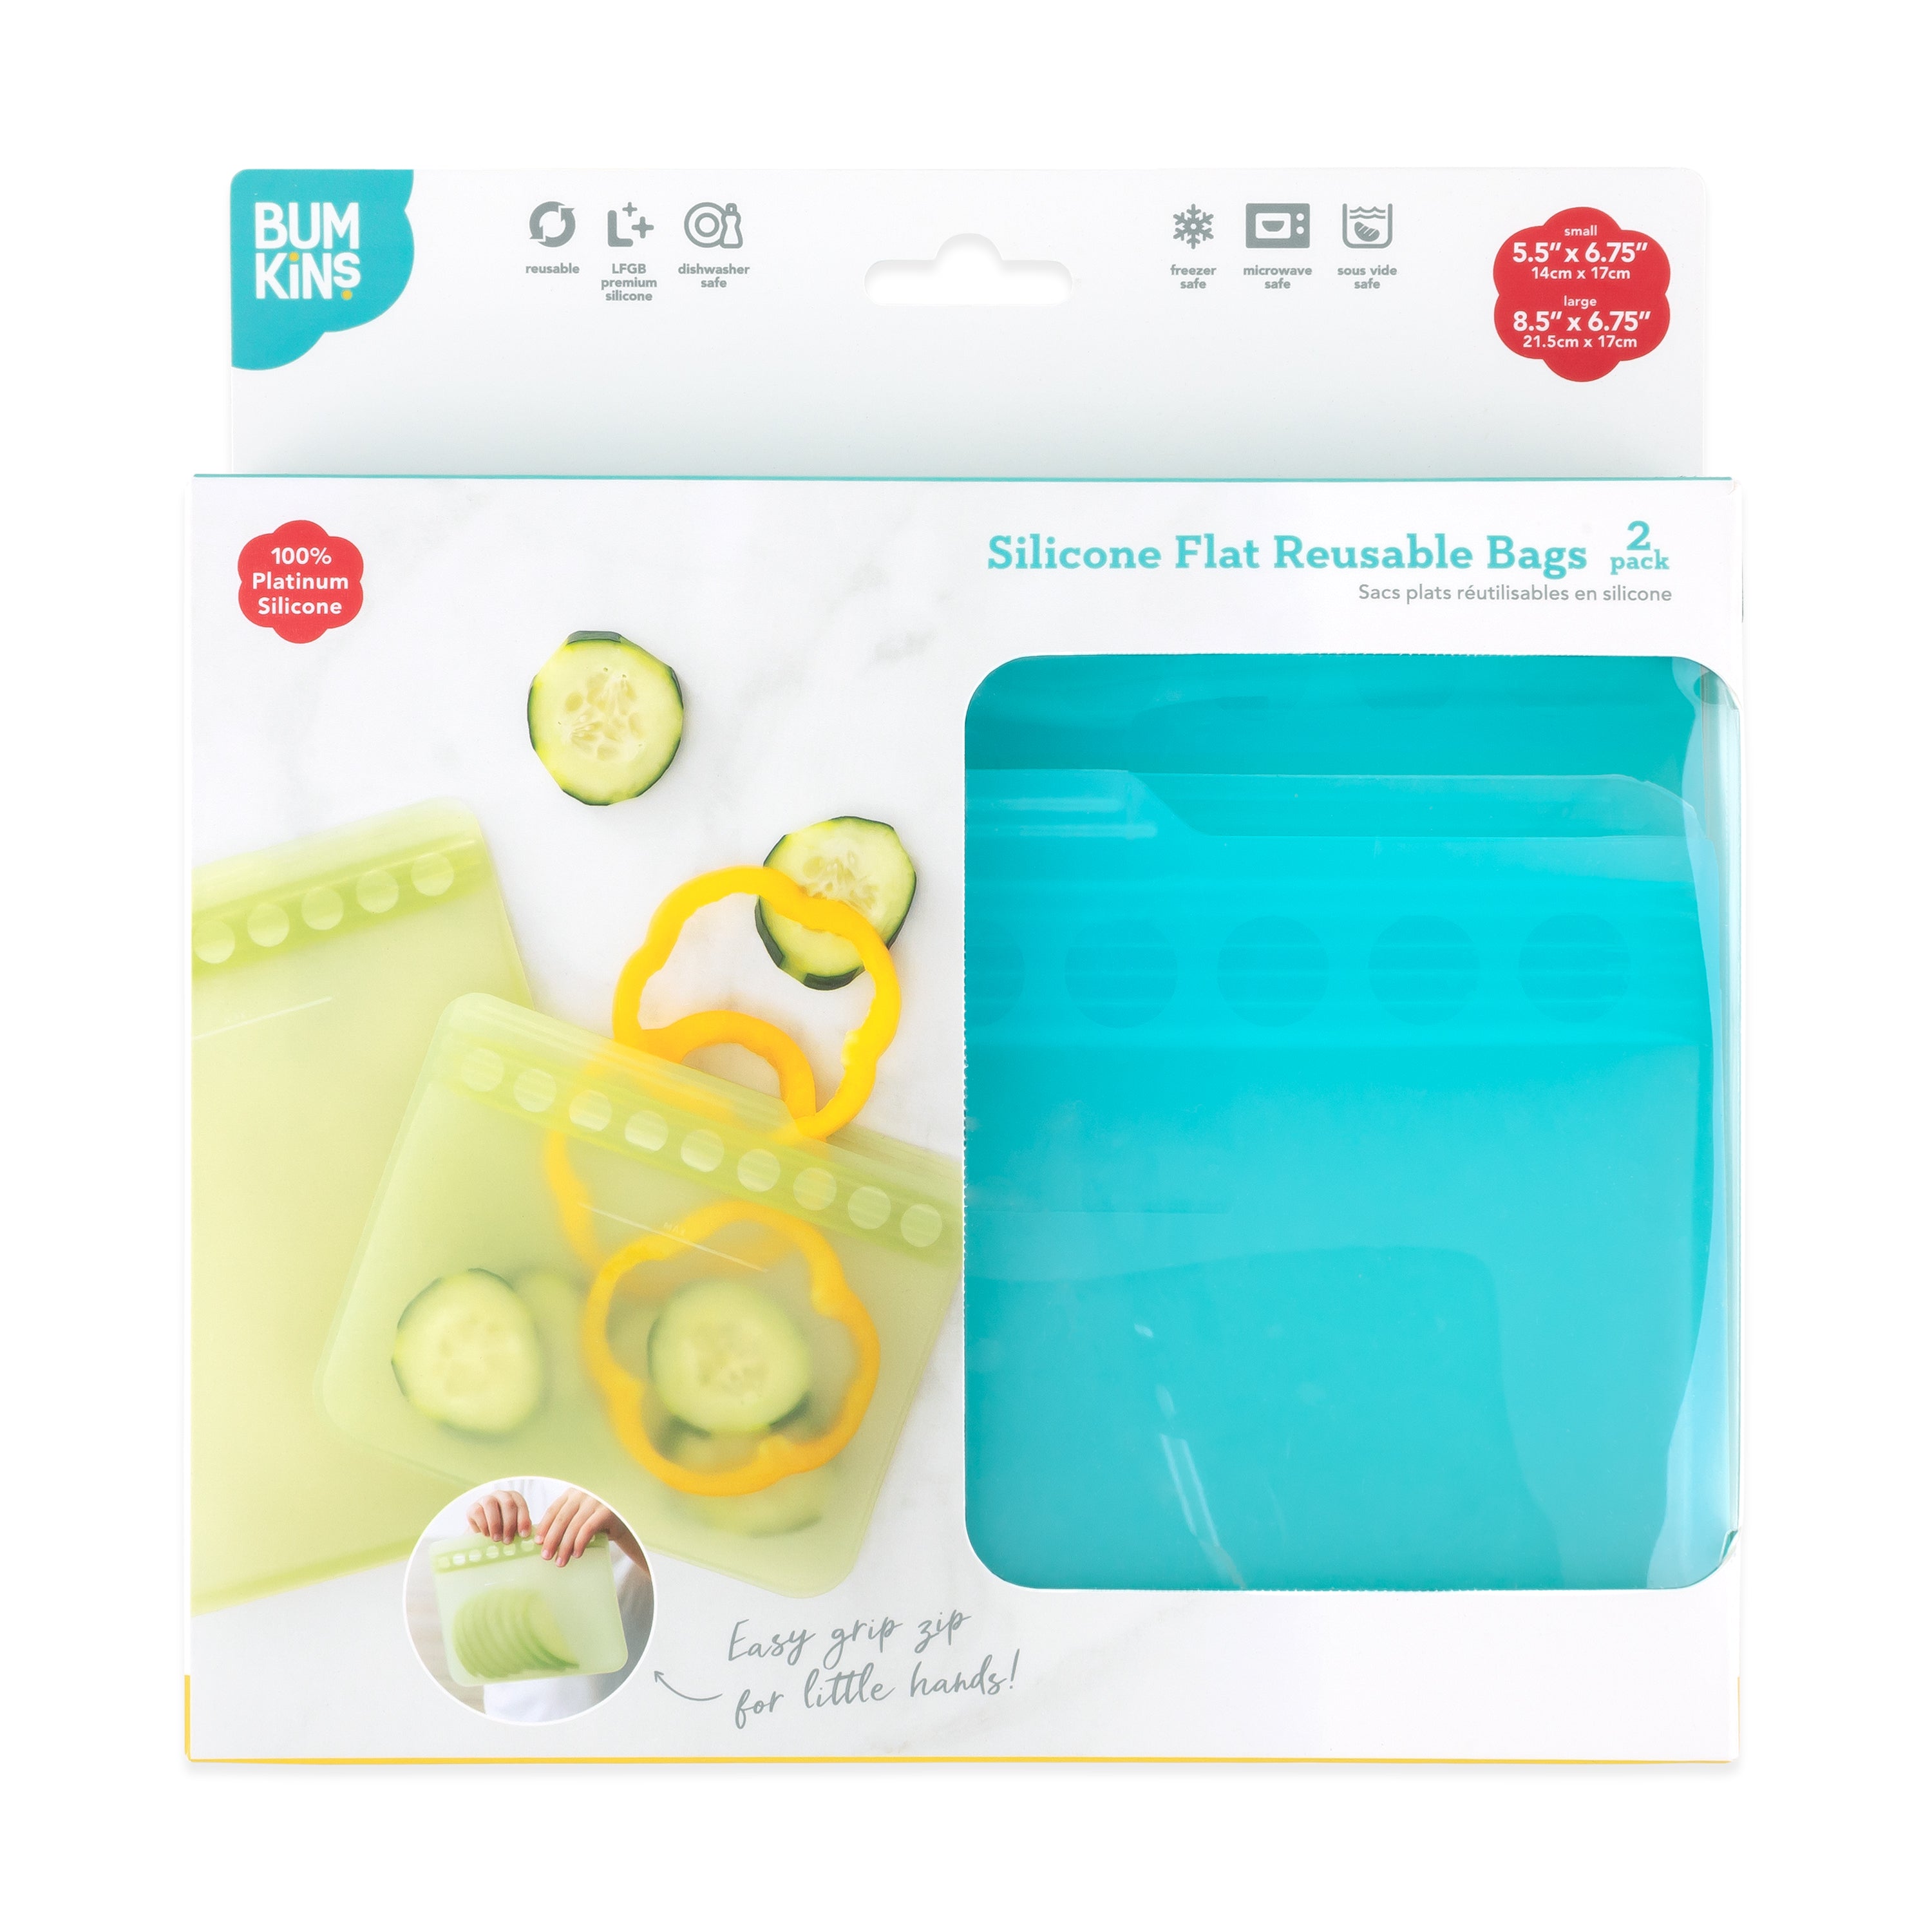 Silicone Flat Reusable Bags: Store, Freeze & Pack with Ease